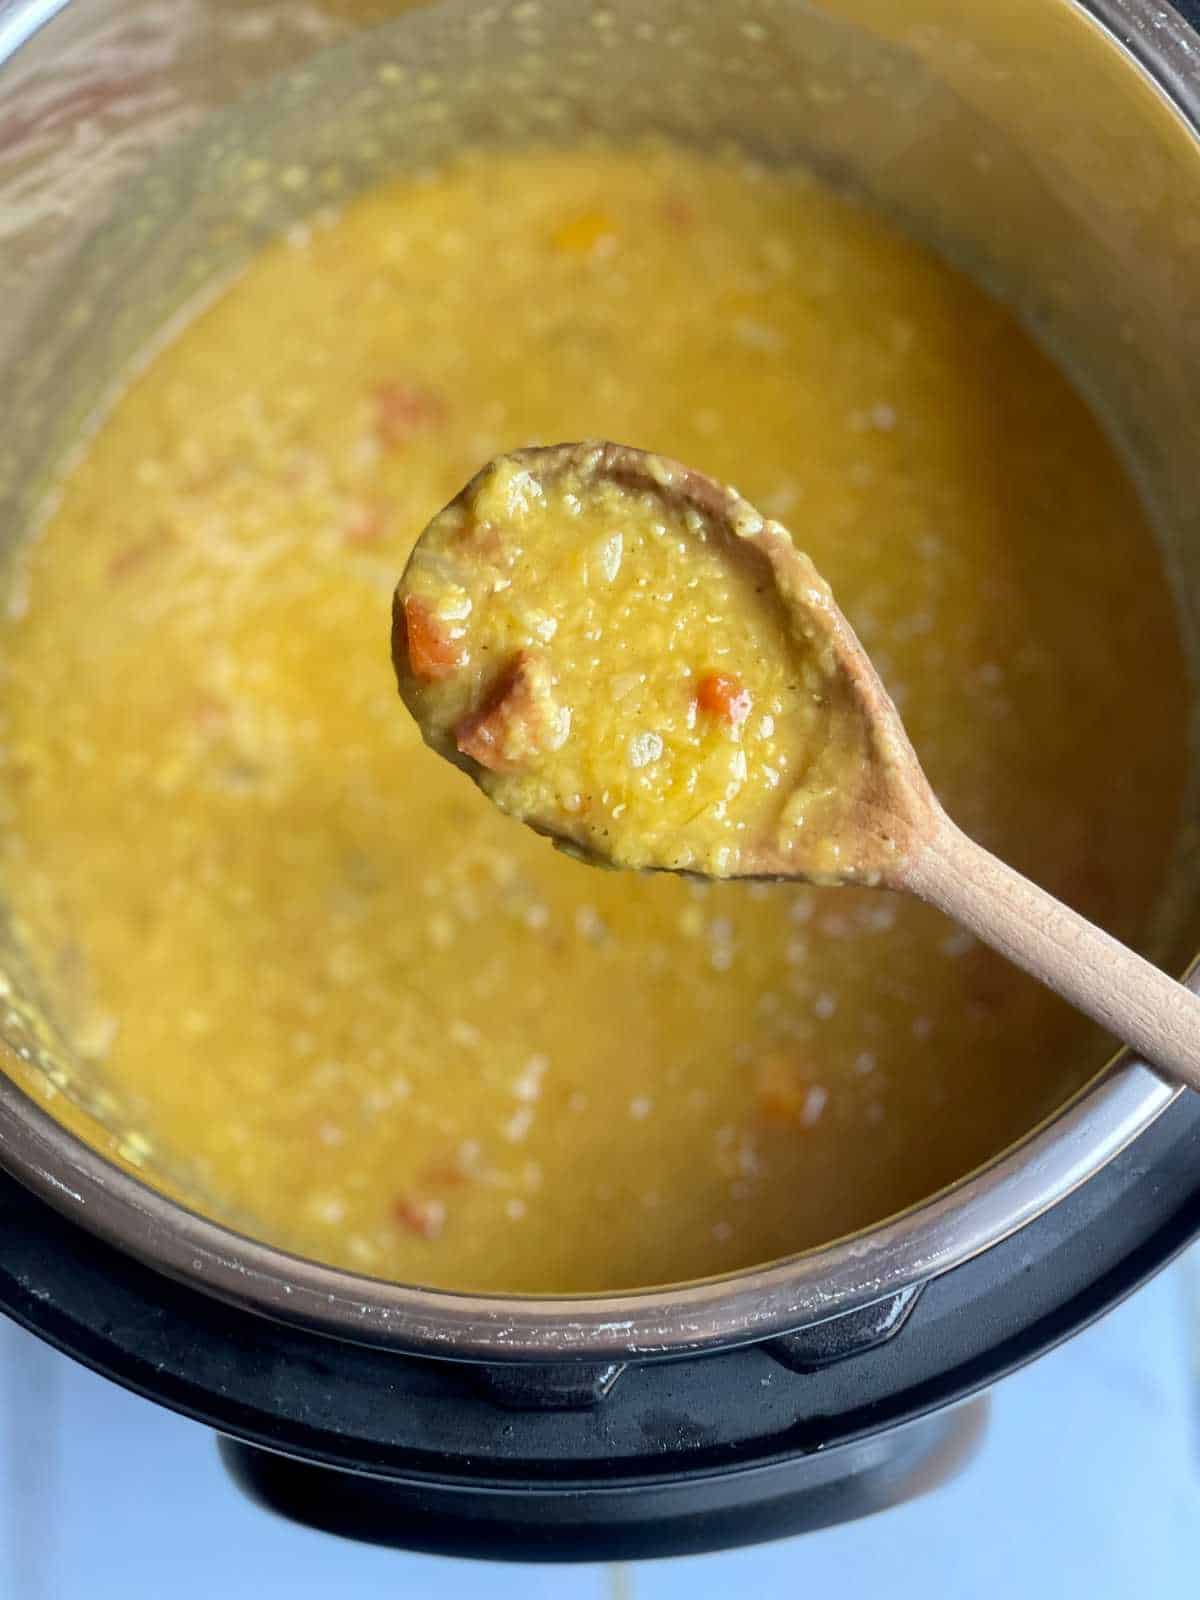 A wooden spoon is seen from above holding some of the red lentil and chorizo soup, underneath is an Instant pot electric pressure cooker